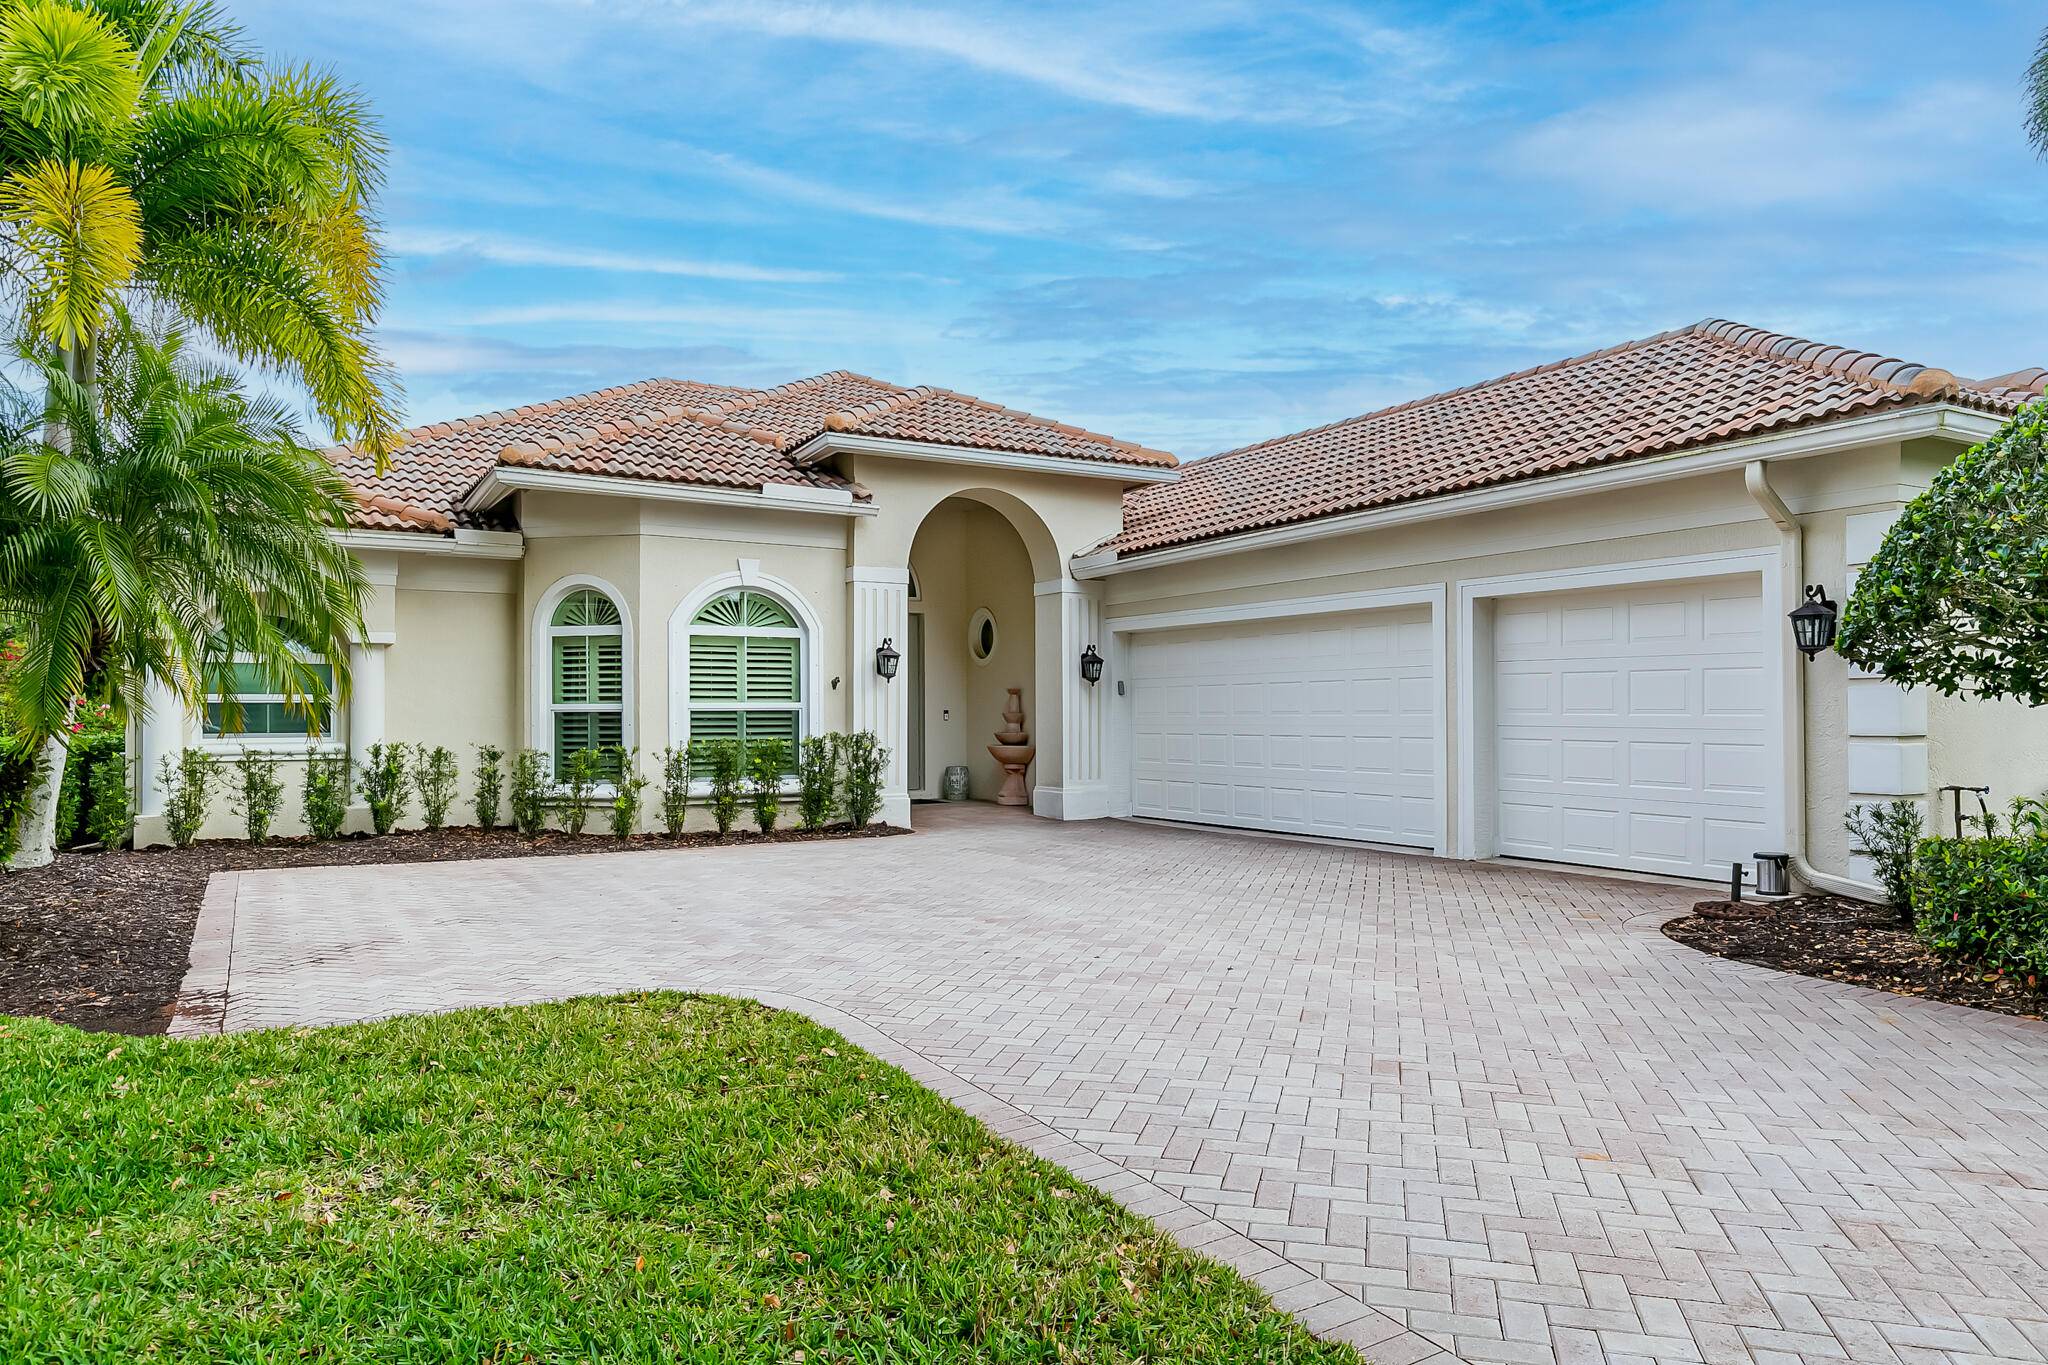 This stunning one owner home is located in the lovely community of Club Side in PGA Village a minute from the front gate.